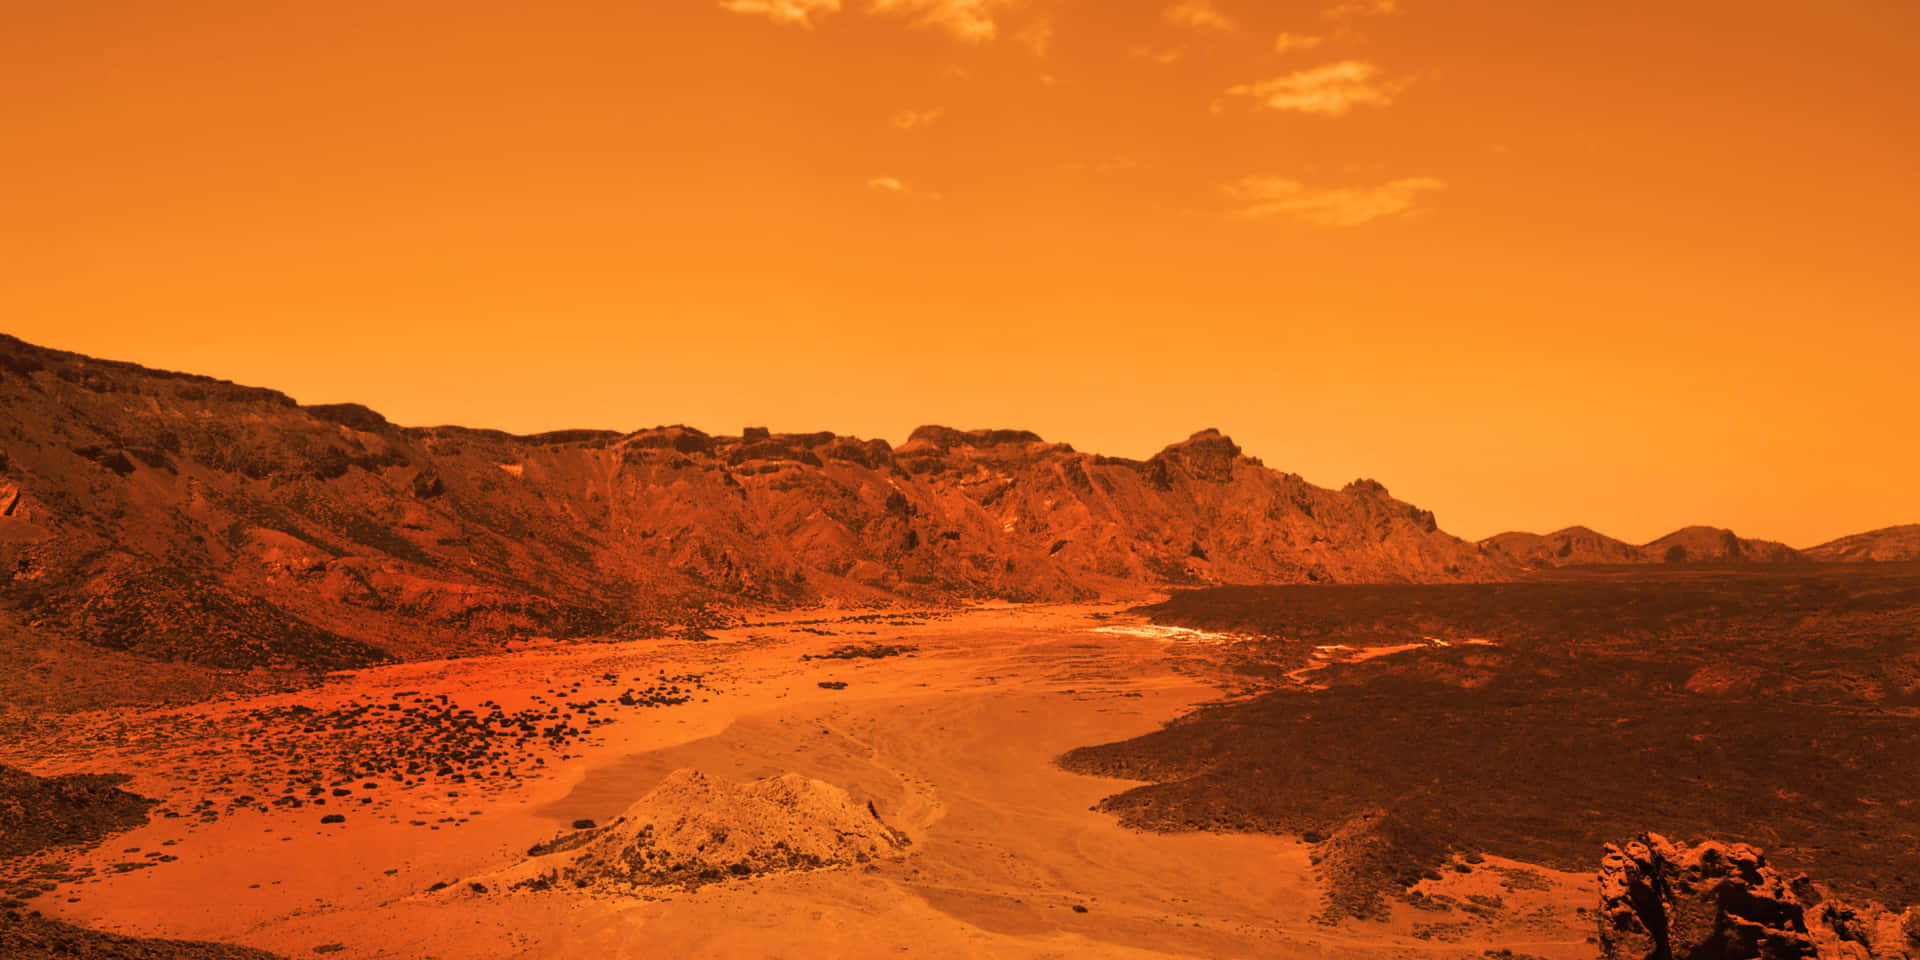 A Desert Landscape With A Red Sky And Mountains